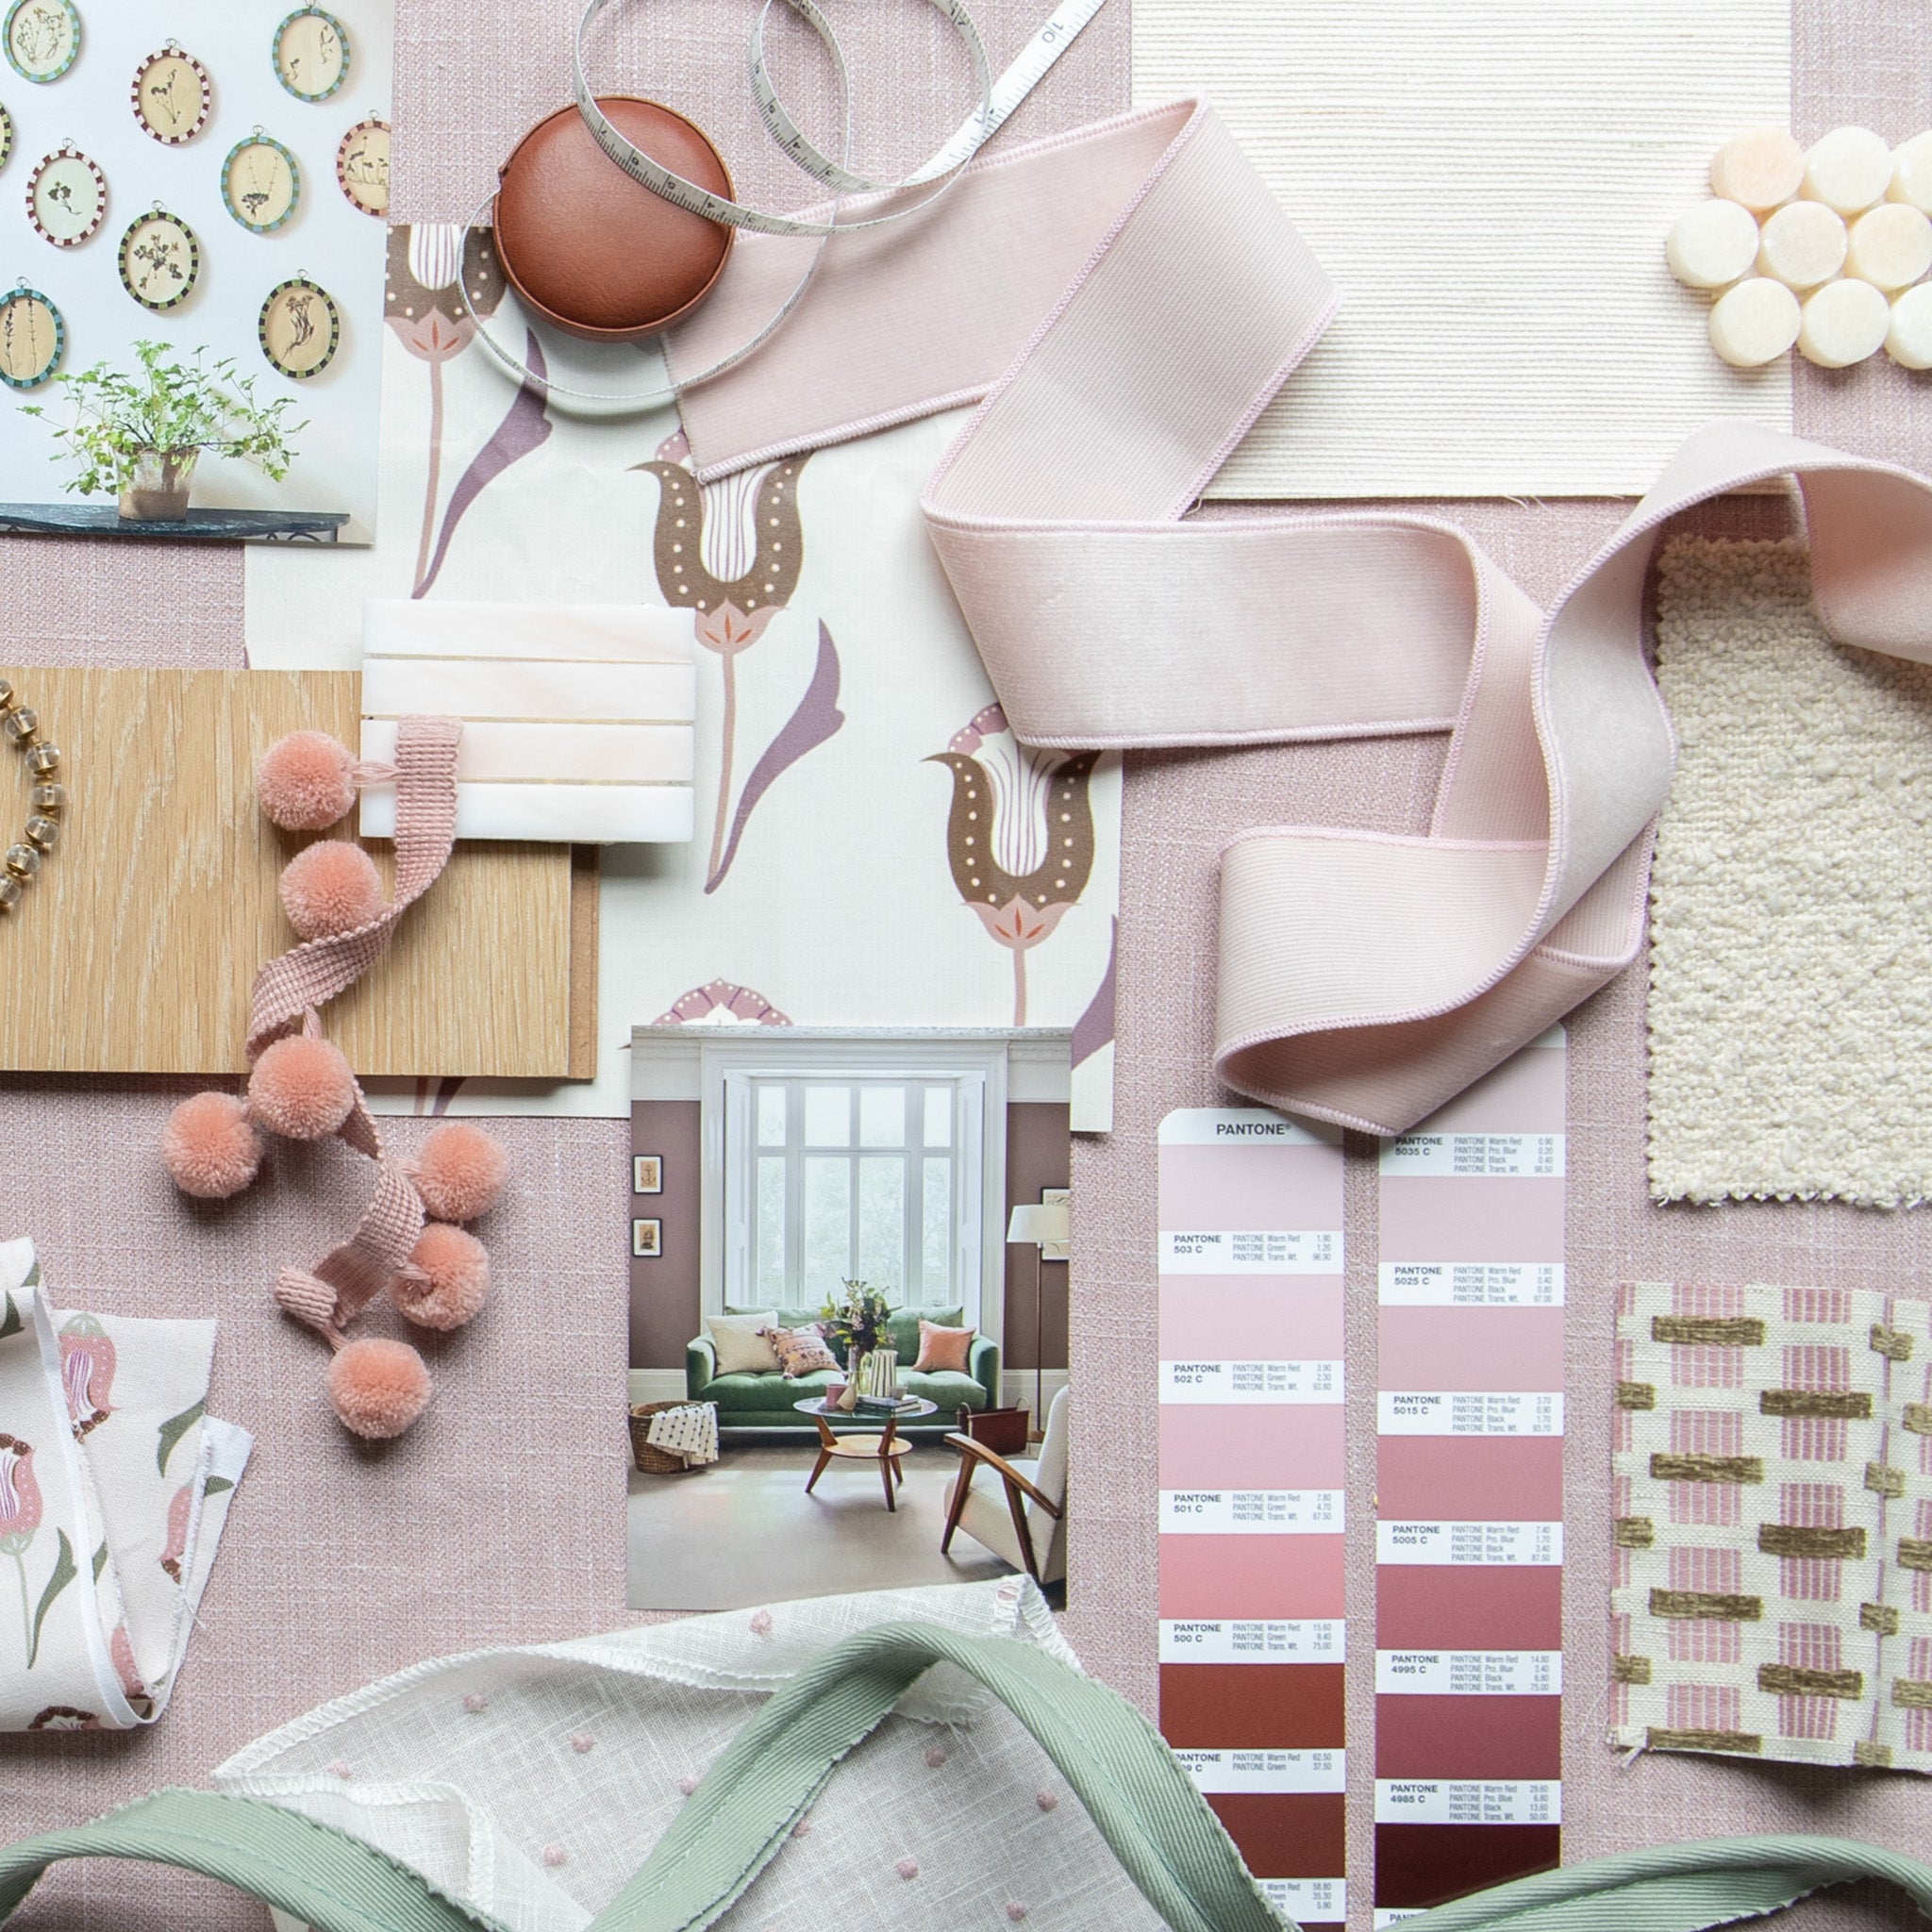 interior design mood board with pink and floral fabric swatches, white tiles, pink paint swatches, and pink and green trim options